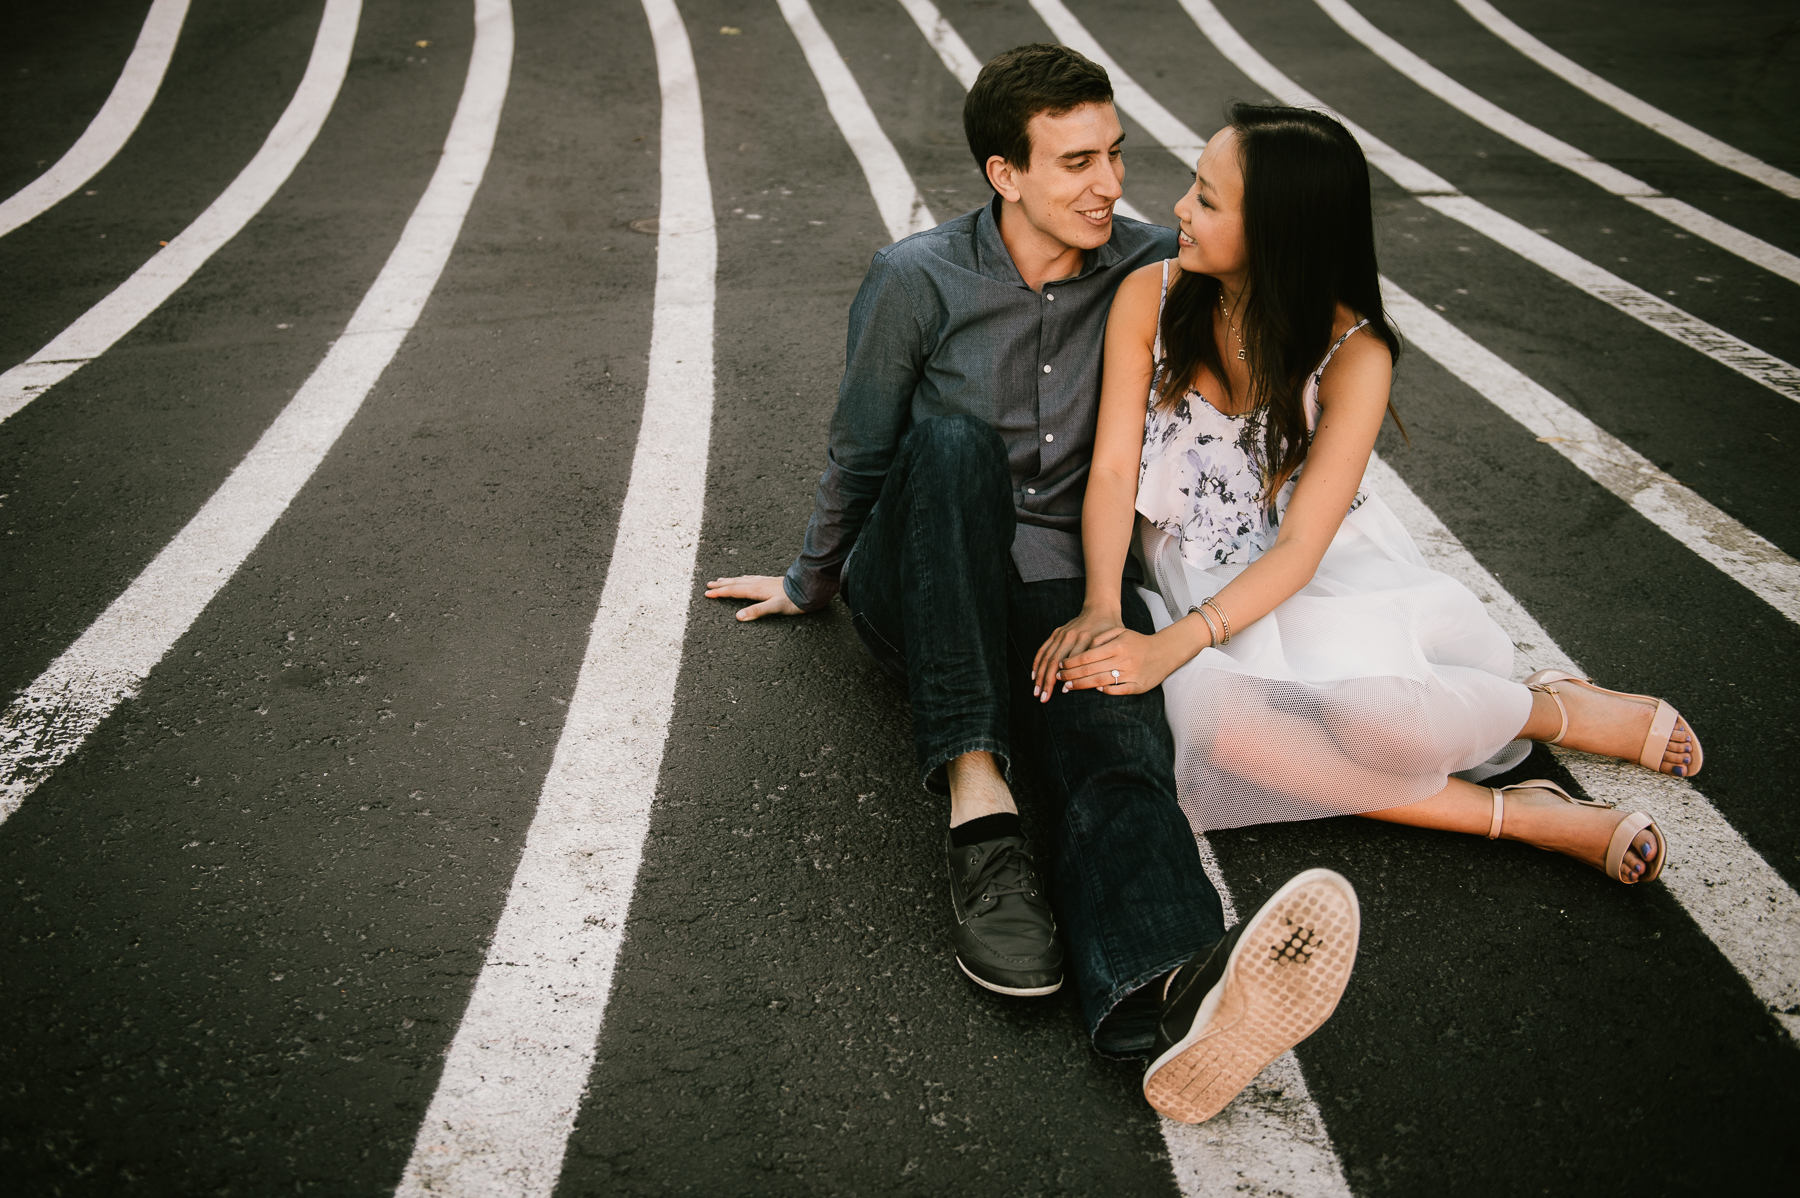 seattle-wedding-photographer-engagement-sessions-best-39